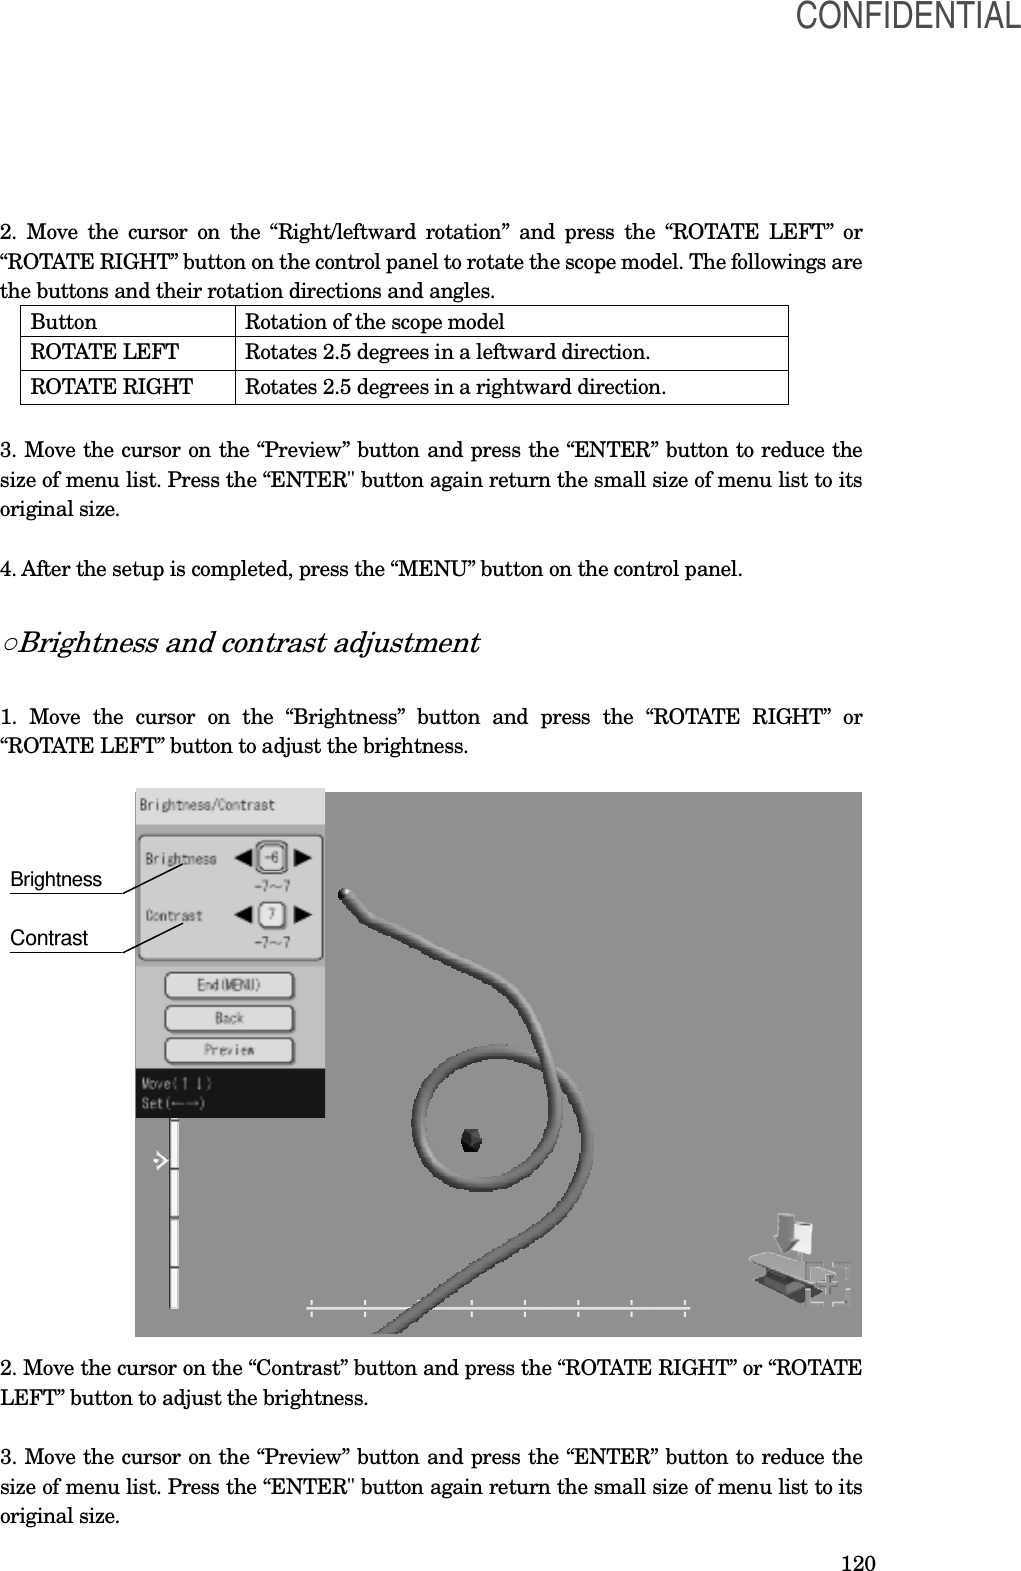  120 2. Move the cursor on the “Right/leftward  rotation” and press the “ROTATE LEFT” or “ROTATE RIGHT” button on the control panel to rotate the scope model. The followings are the buttons and their rotation directions and angles. Button  Rotation of the scope model ROTATE LEFT  Rotates 2.5 degrees in a leftward direction. ROTATE RIGHT  Rotates 2.5 degrees in a rightward direction.  3. Move the cursor on the “Preview” button and press the “ENTER” button to reduce the size of menu list. Press the “ENTER&quot; button again return the small size of menu list to its original size.  4. After the setup is completed, press the “MENU” button on the control panel.  ○Brightness and contrast adjustment  1.  Move  the  cursor  on  the  “Brightness”  button  and  press  the  “ROTATE  RIGHT”  or “ROTATE LEFT” button to adjust the brightness.                     2. Move the cursor on the “Contrast” button and press the “ROTATE RIGHT” or “ROTATE LEFT” button to adjust the brightness.   3. Move the cursor on the “Preview” button and press the “ENTER” button to reduce the size of menu list. Press the “ENTER&quot; button again return the small size of menu list to its original size.   Brightness Contrast   CONFIDENTIAL